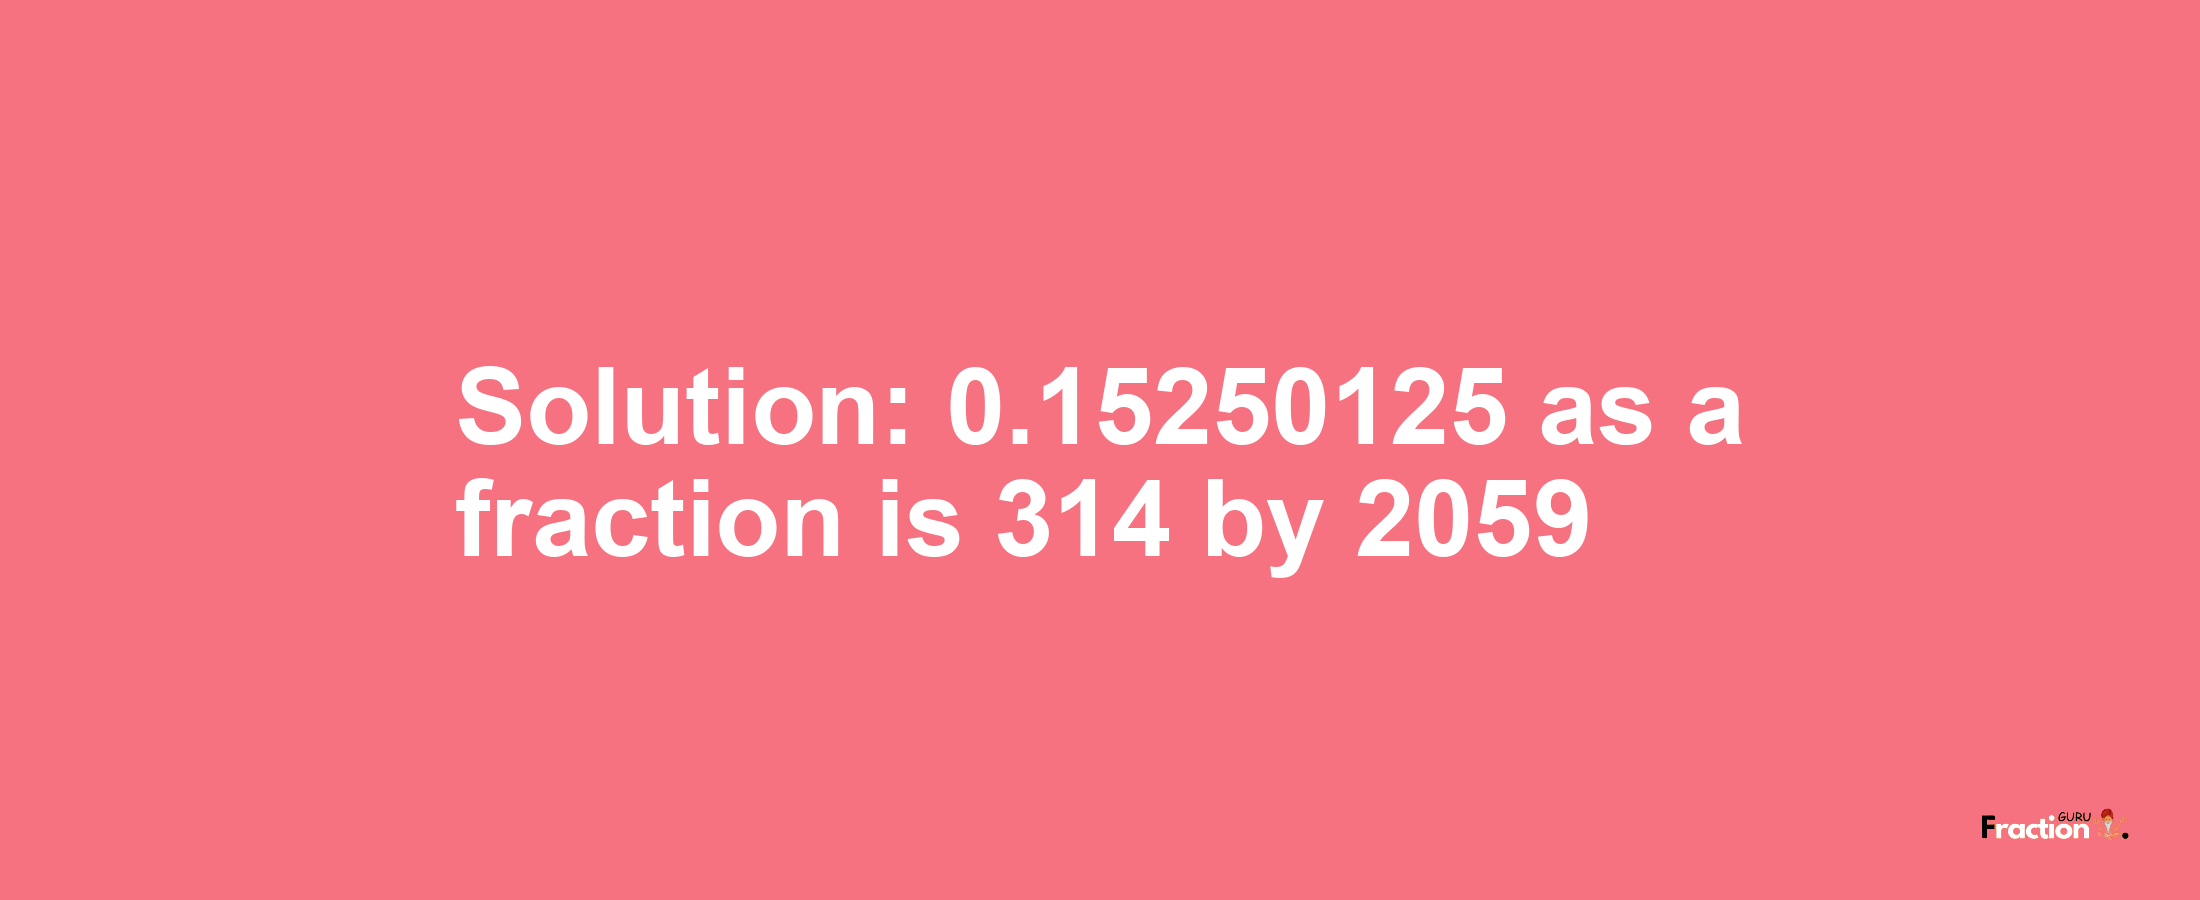 Solution:0.15250125 as a fraction is 314/2059